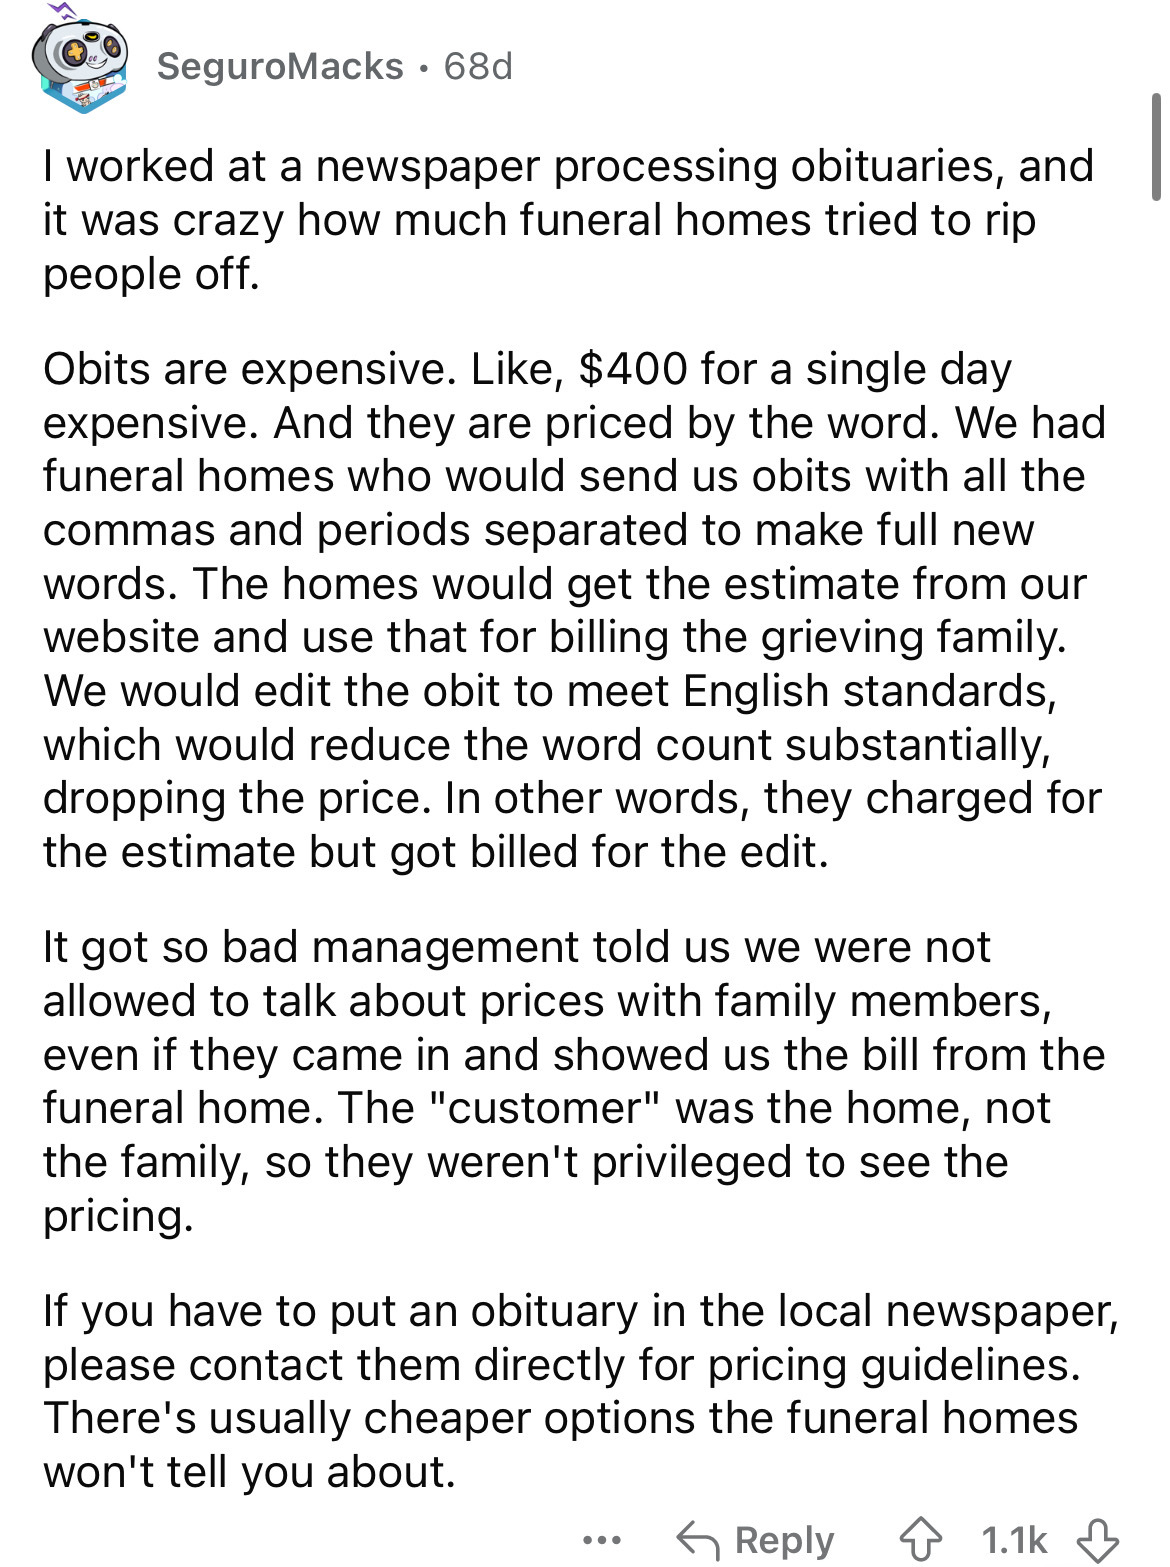 document - SeguroMacks 68d I worked at a newspaper processing obituaries, and it was crazy how much funeral homes tried to rip people off. Obits are expensive. , $400 for a single day expensive. And they are priced by the word. We had funeral homes who wo